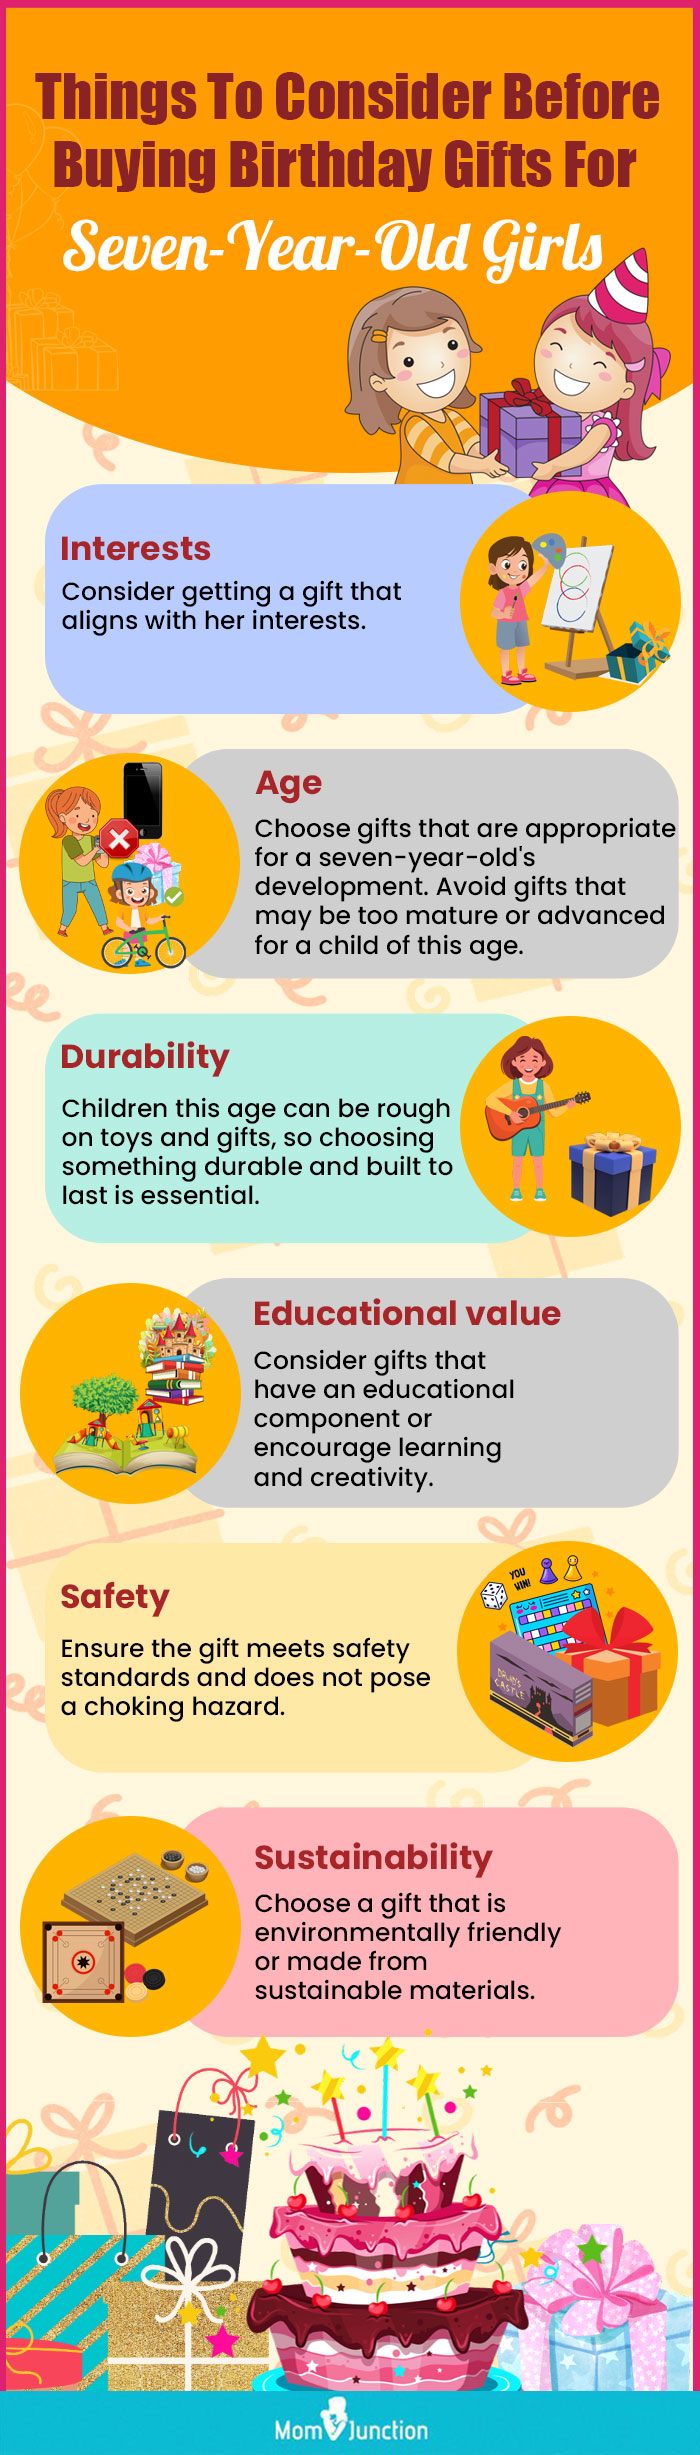 Things To Consider Before Buying Birthday Gifts For Seven Year Old Girls